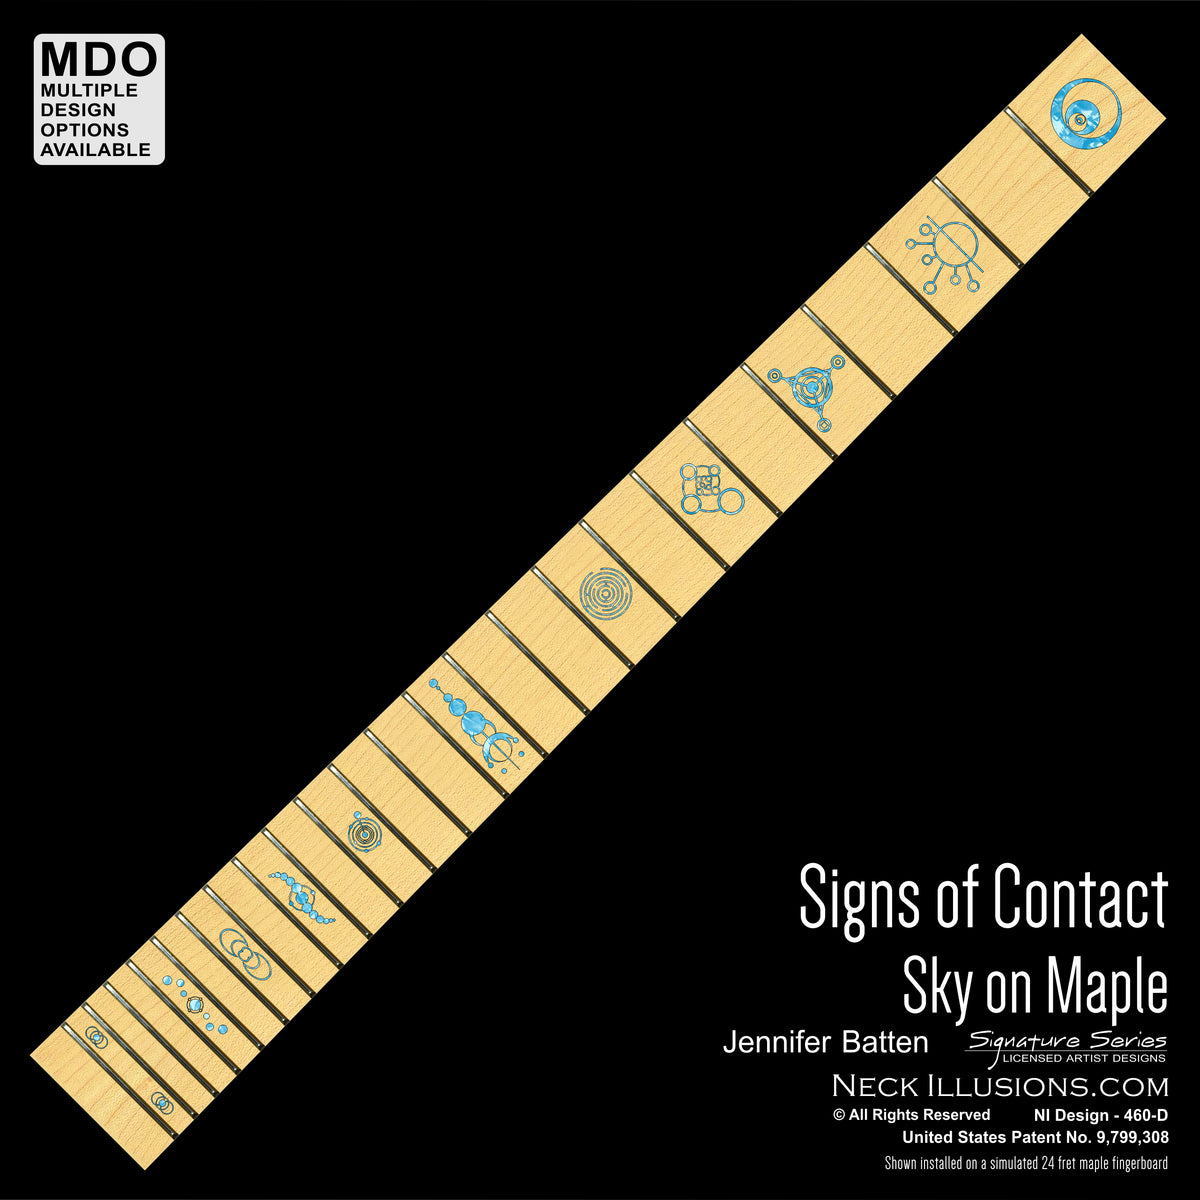 Jennifer Batten - Signs of Contact on Maple